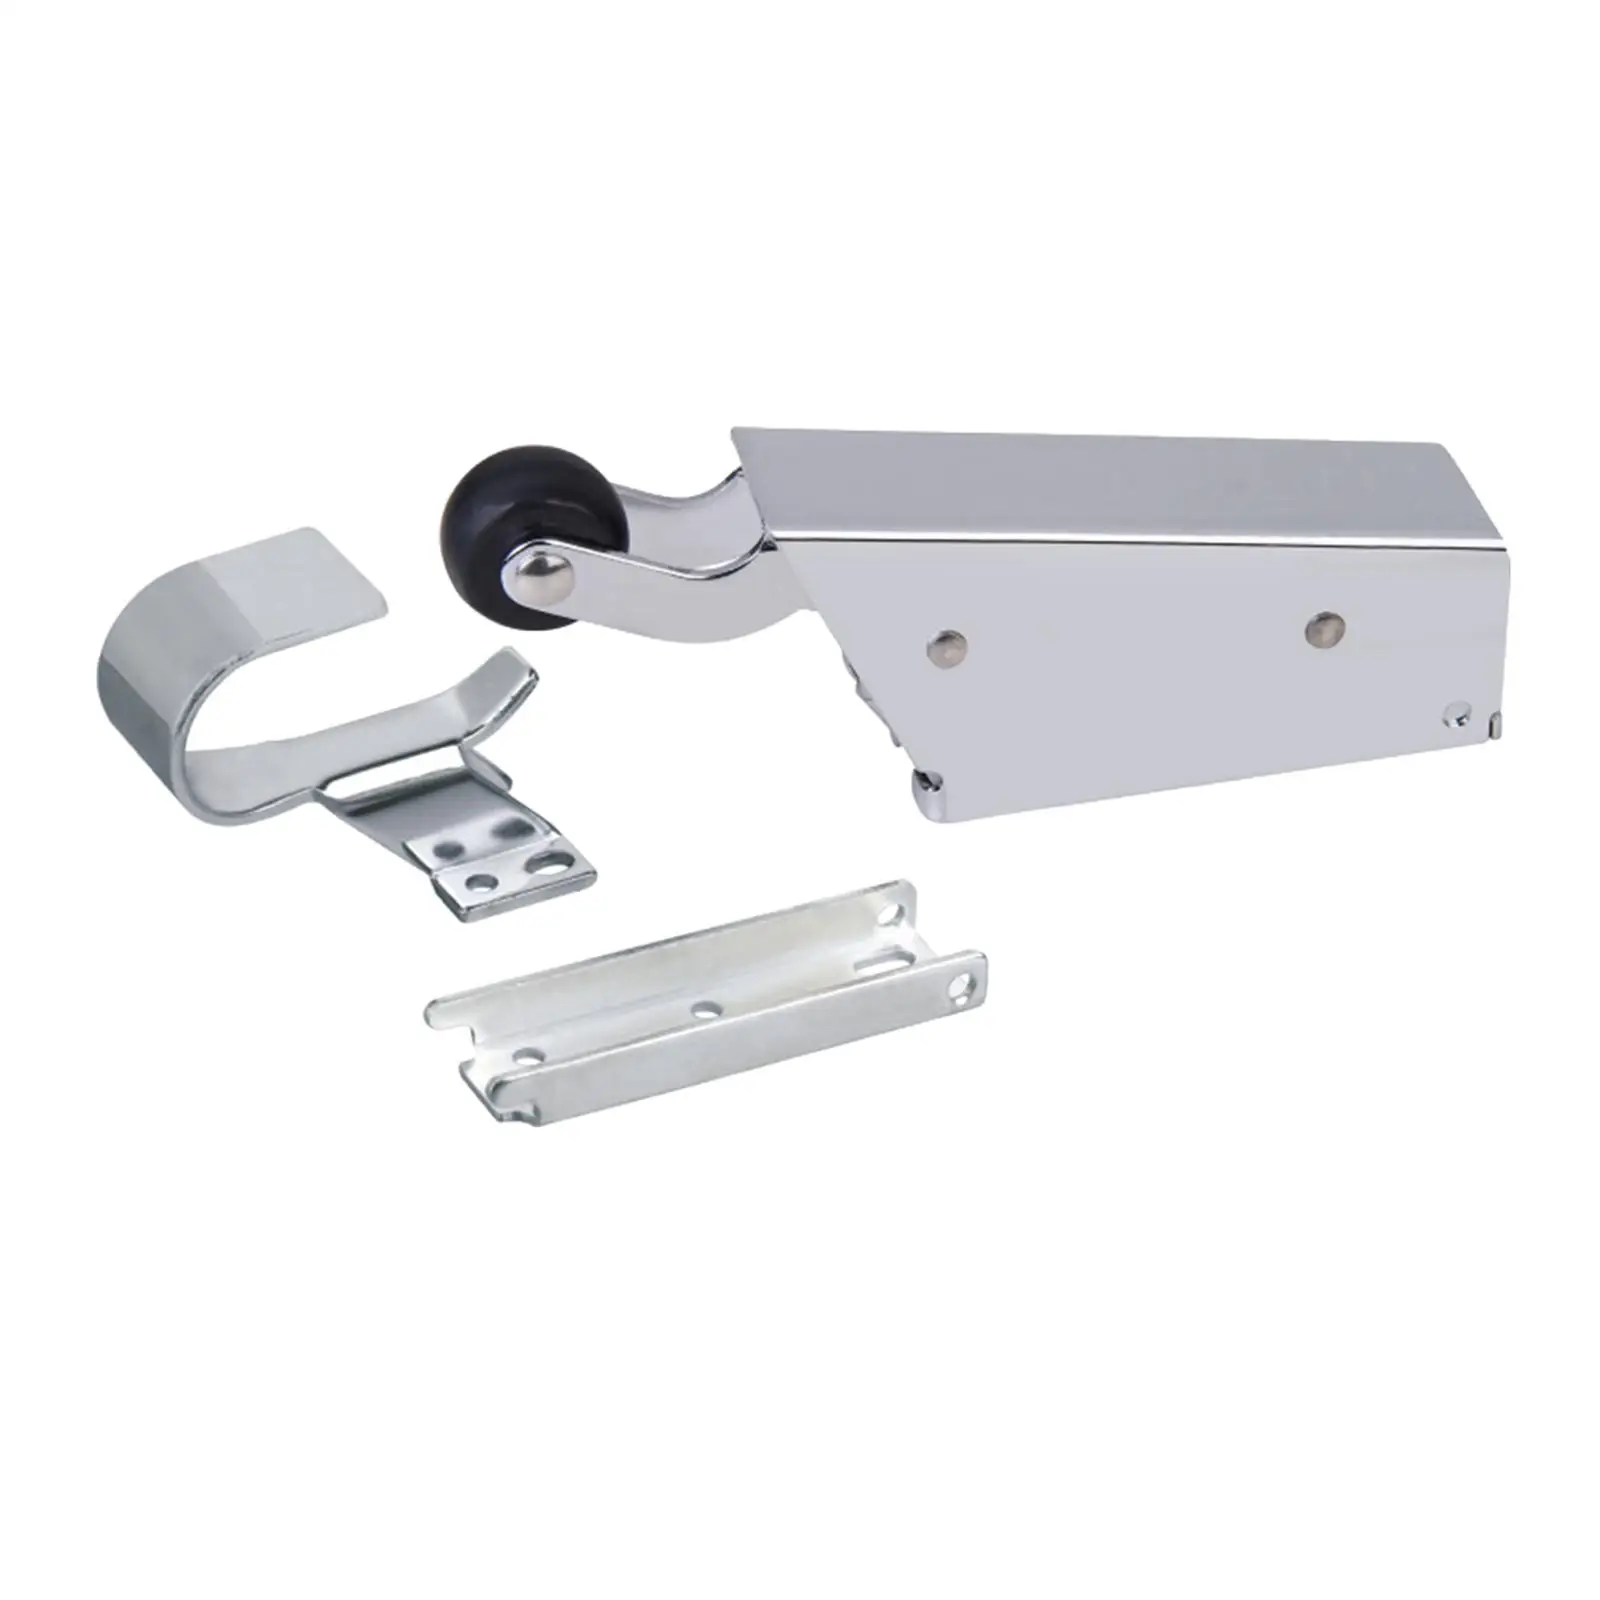 Spring Action Doors Closer Steel Automatic School Refrigeration Door Closers Spring Loaded with Quiet Rubber Wheel Hotel